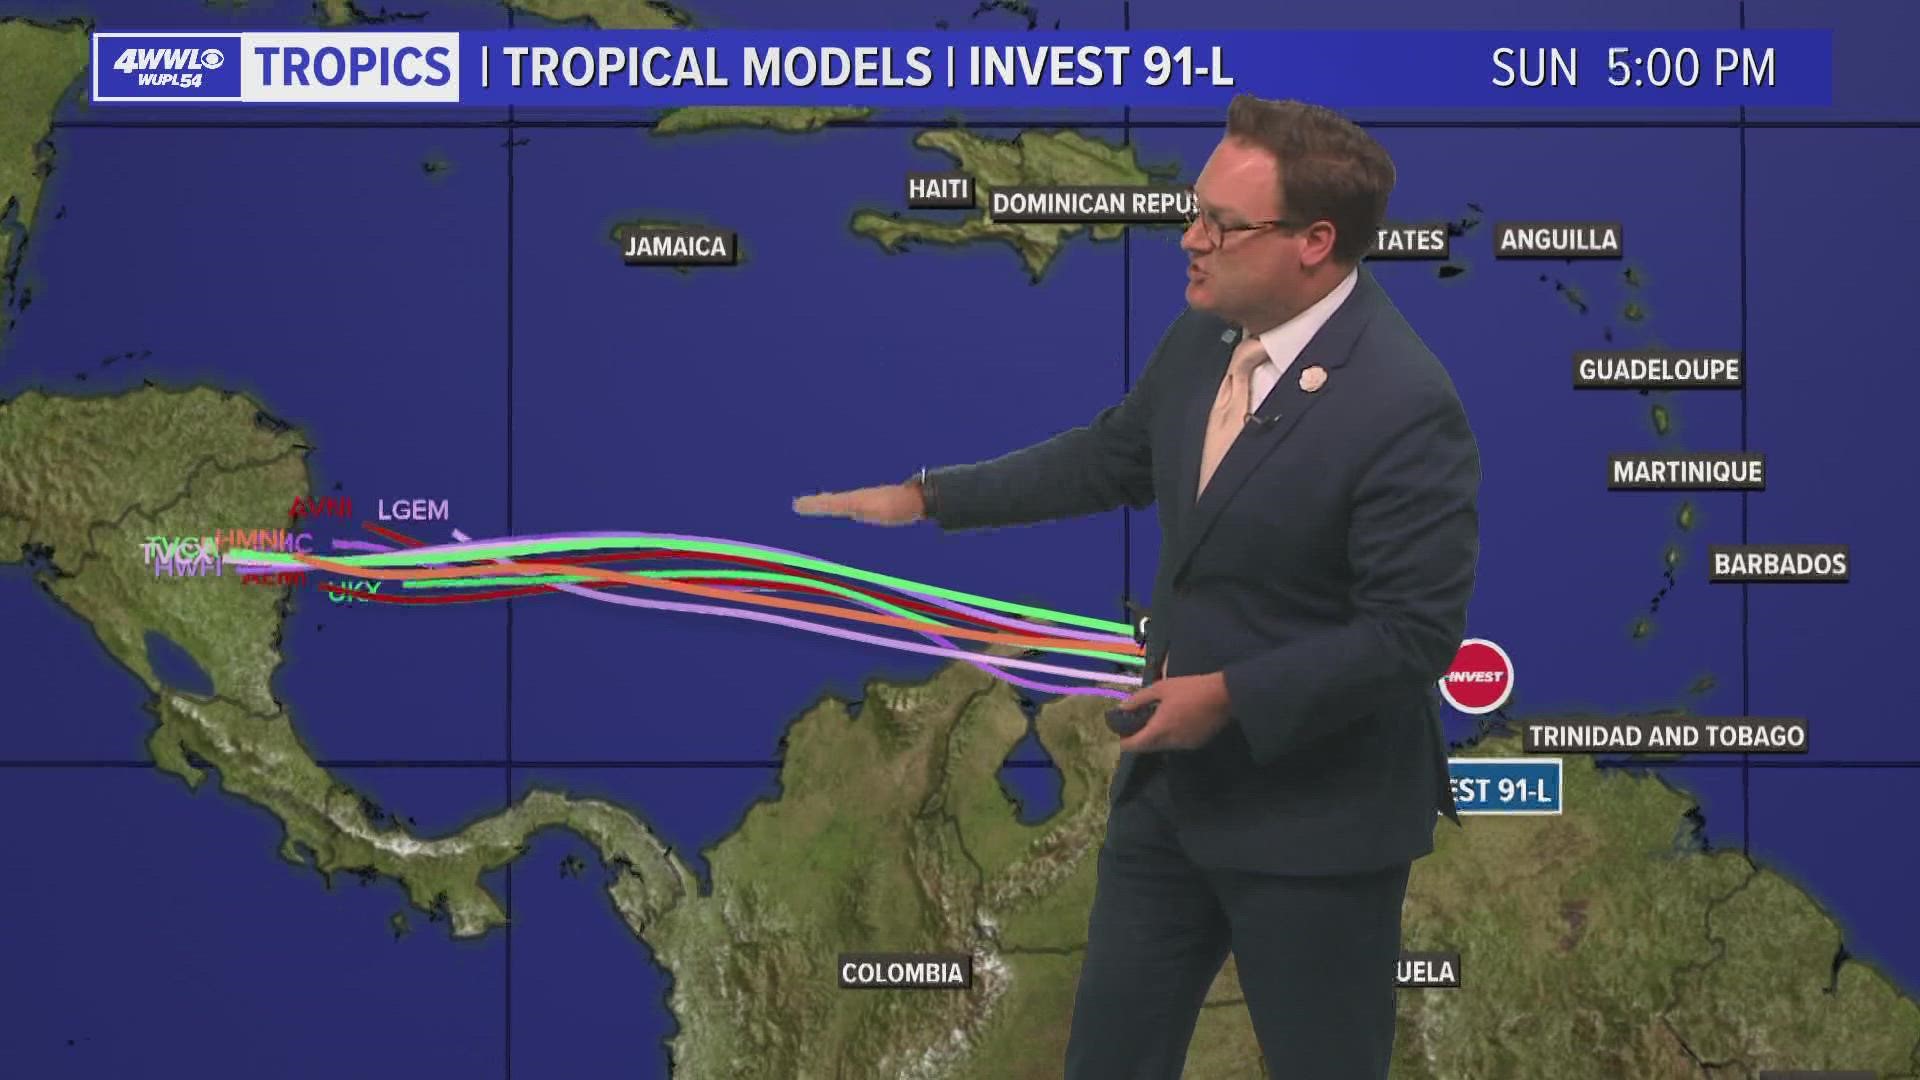 Chief Meteorologist Chris Franklin has the latest model trends on Invest 91 and newly upgraded TD 12